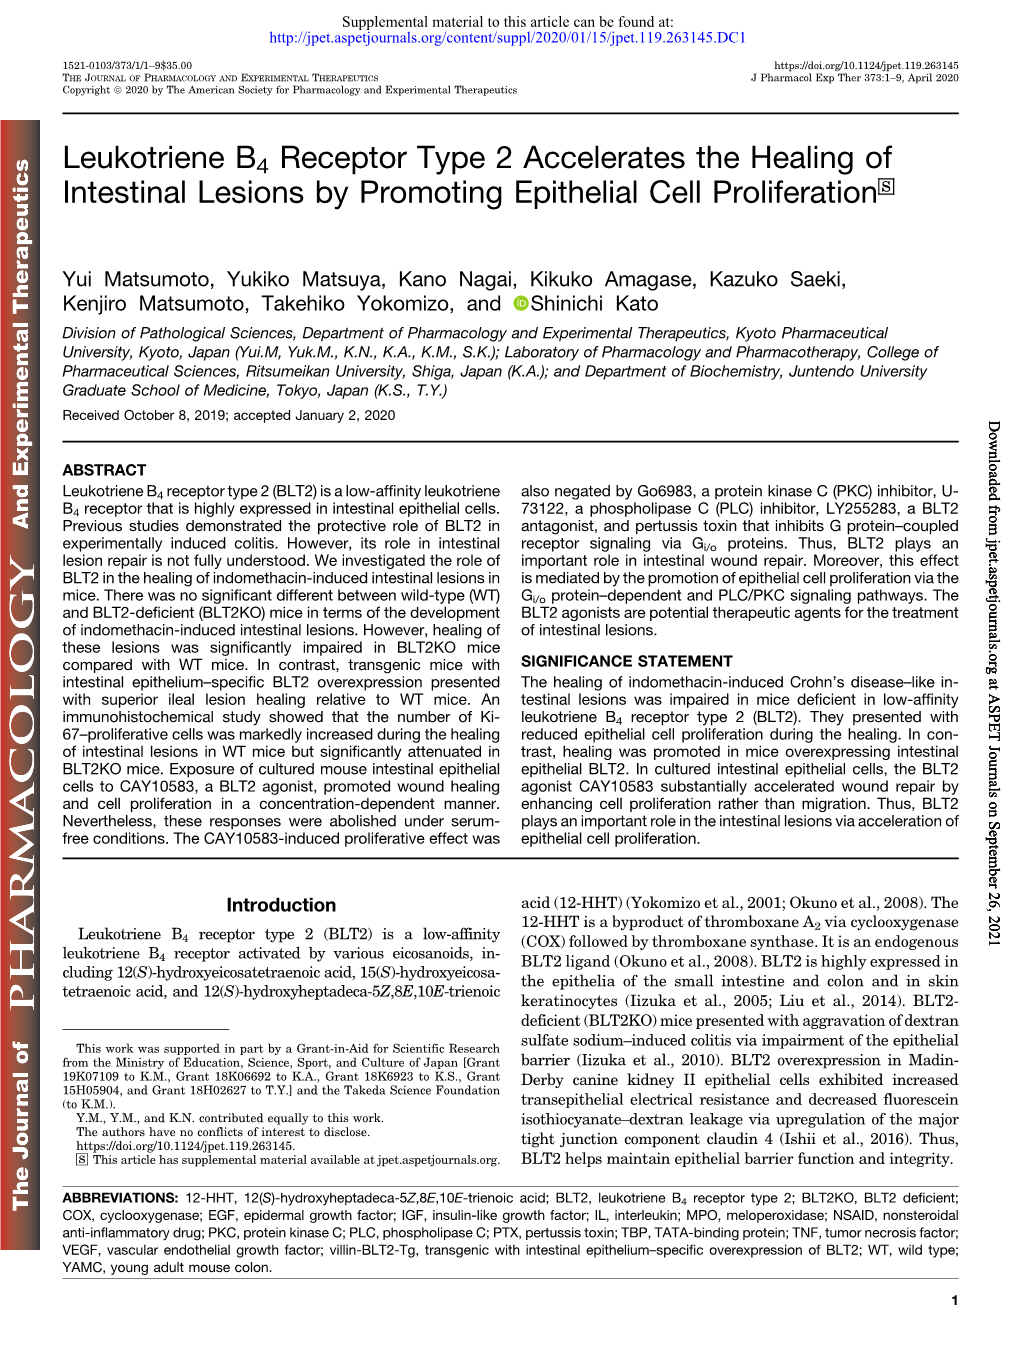 Leukotriene B4 Receptor Type 2 Accelerates the Healing of Intestinal Lesions by Promoting Epithelial Cell Proliferation S